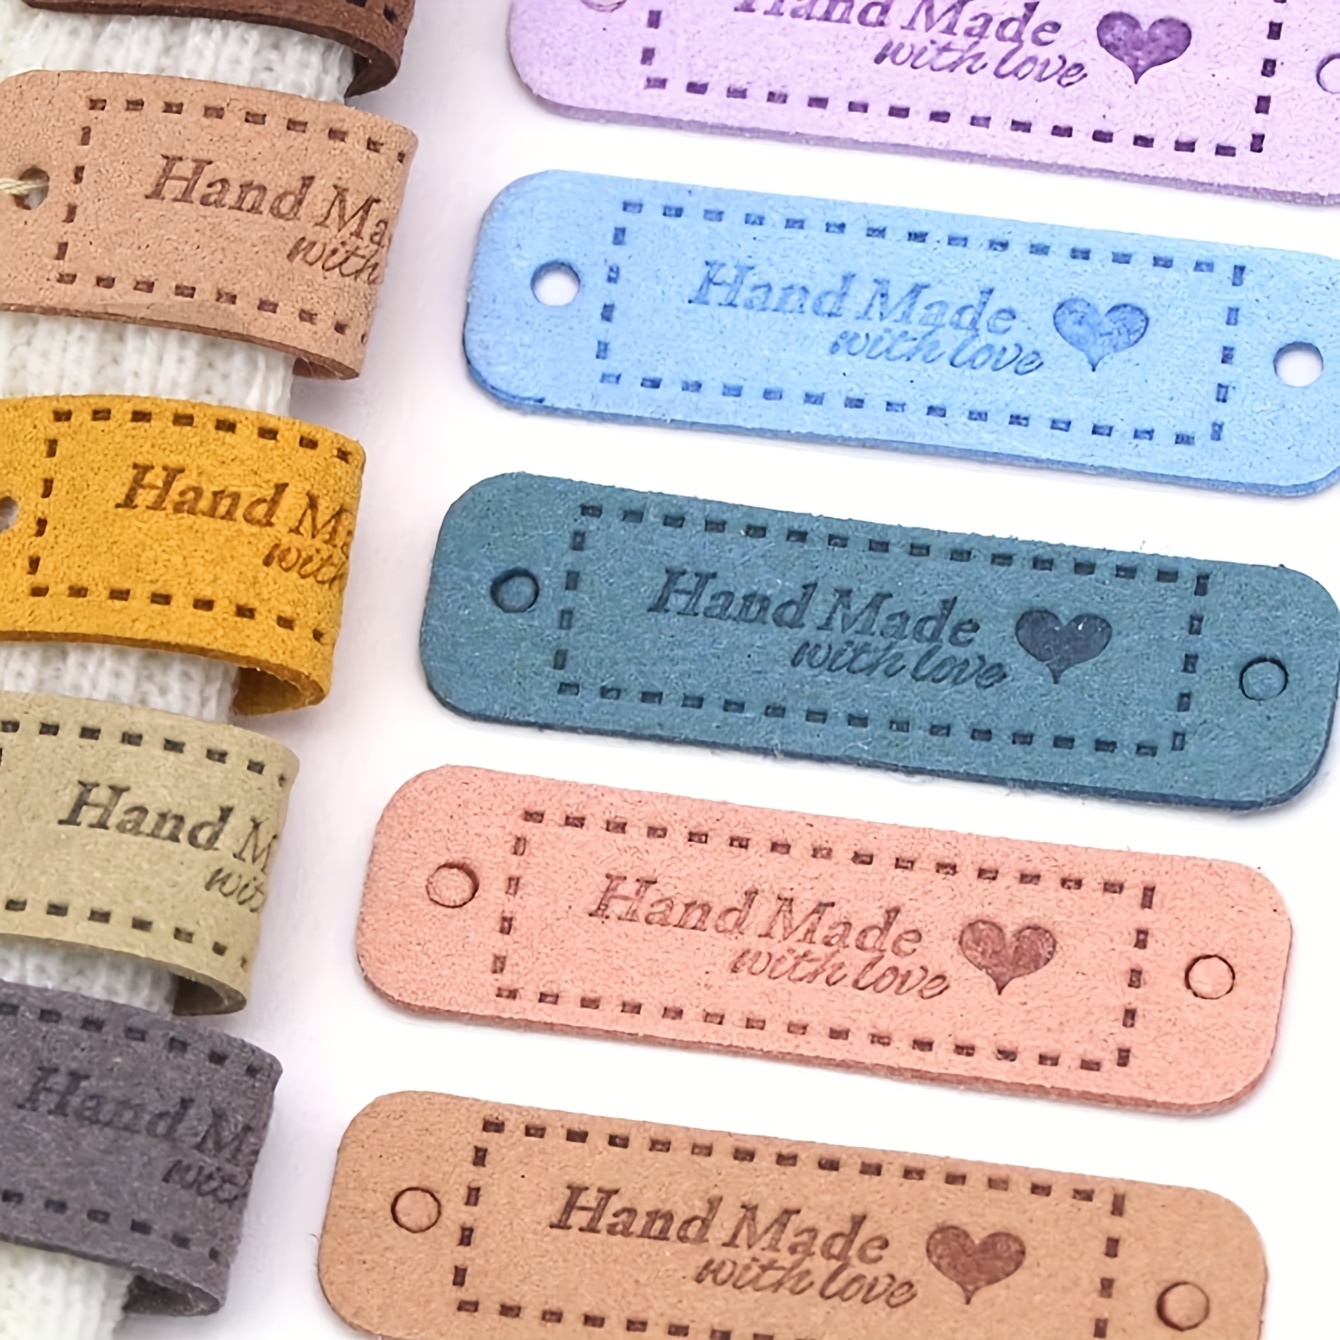  60 Pcs Handmade Leather Labels, Colorful Crochet Tags Leather  Labels with Love Hearts Handmade Tags for Crafts Crochet Fabric Hat Purses  Clothing Handbag Luggage (10 Colors) : Arts, Crafts & Sewing